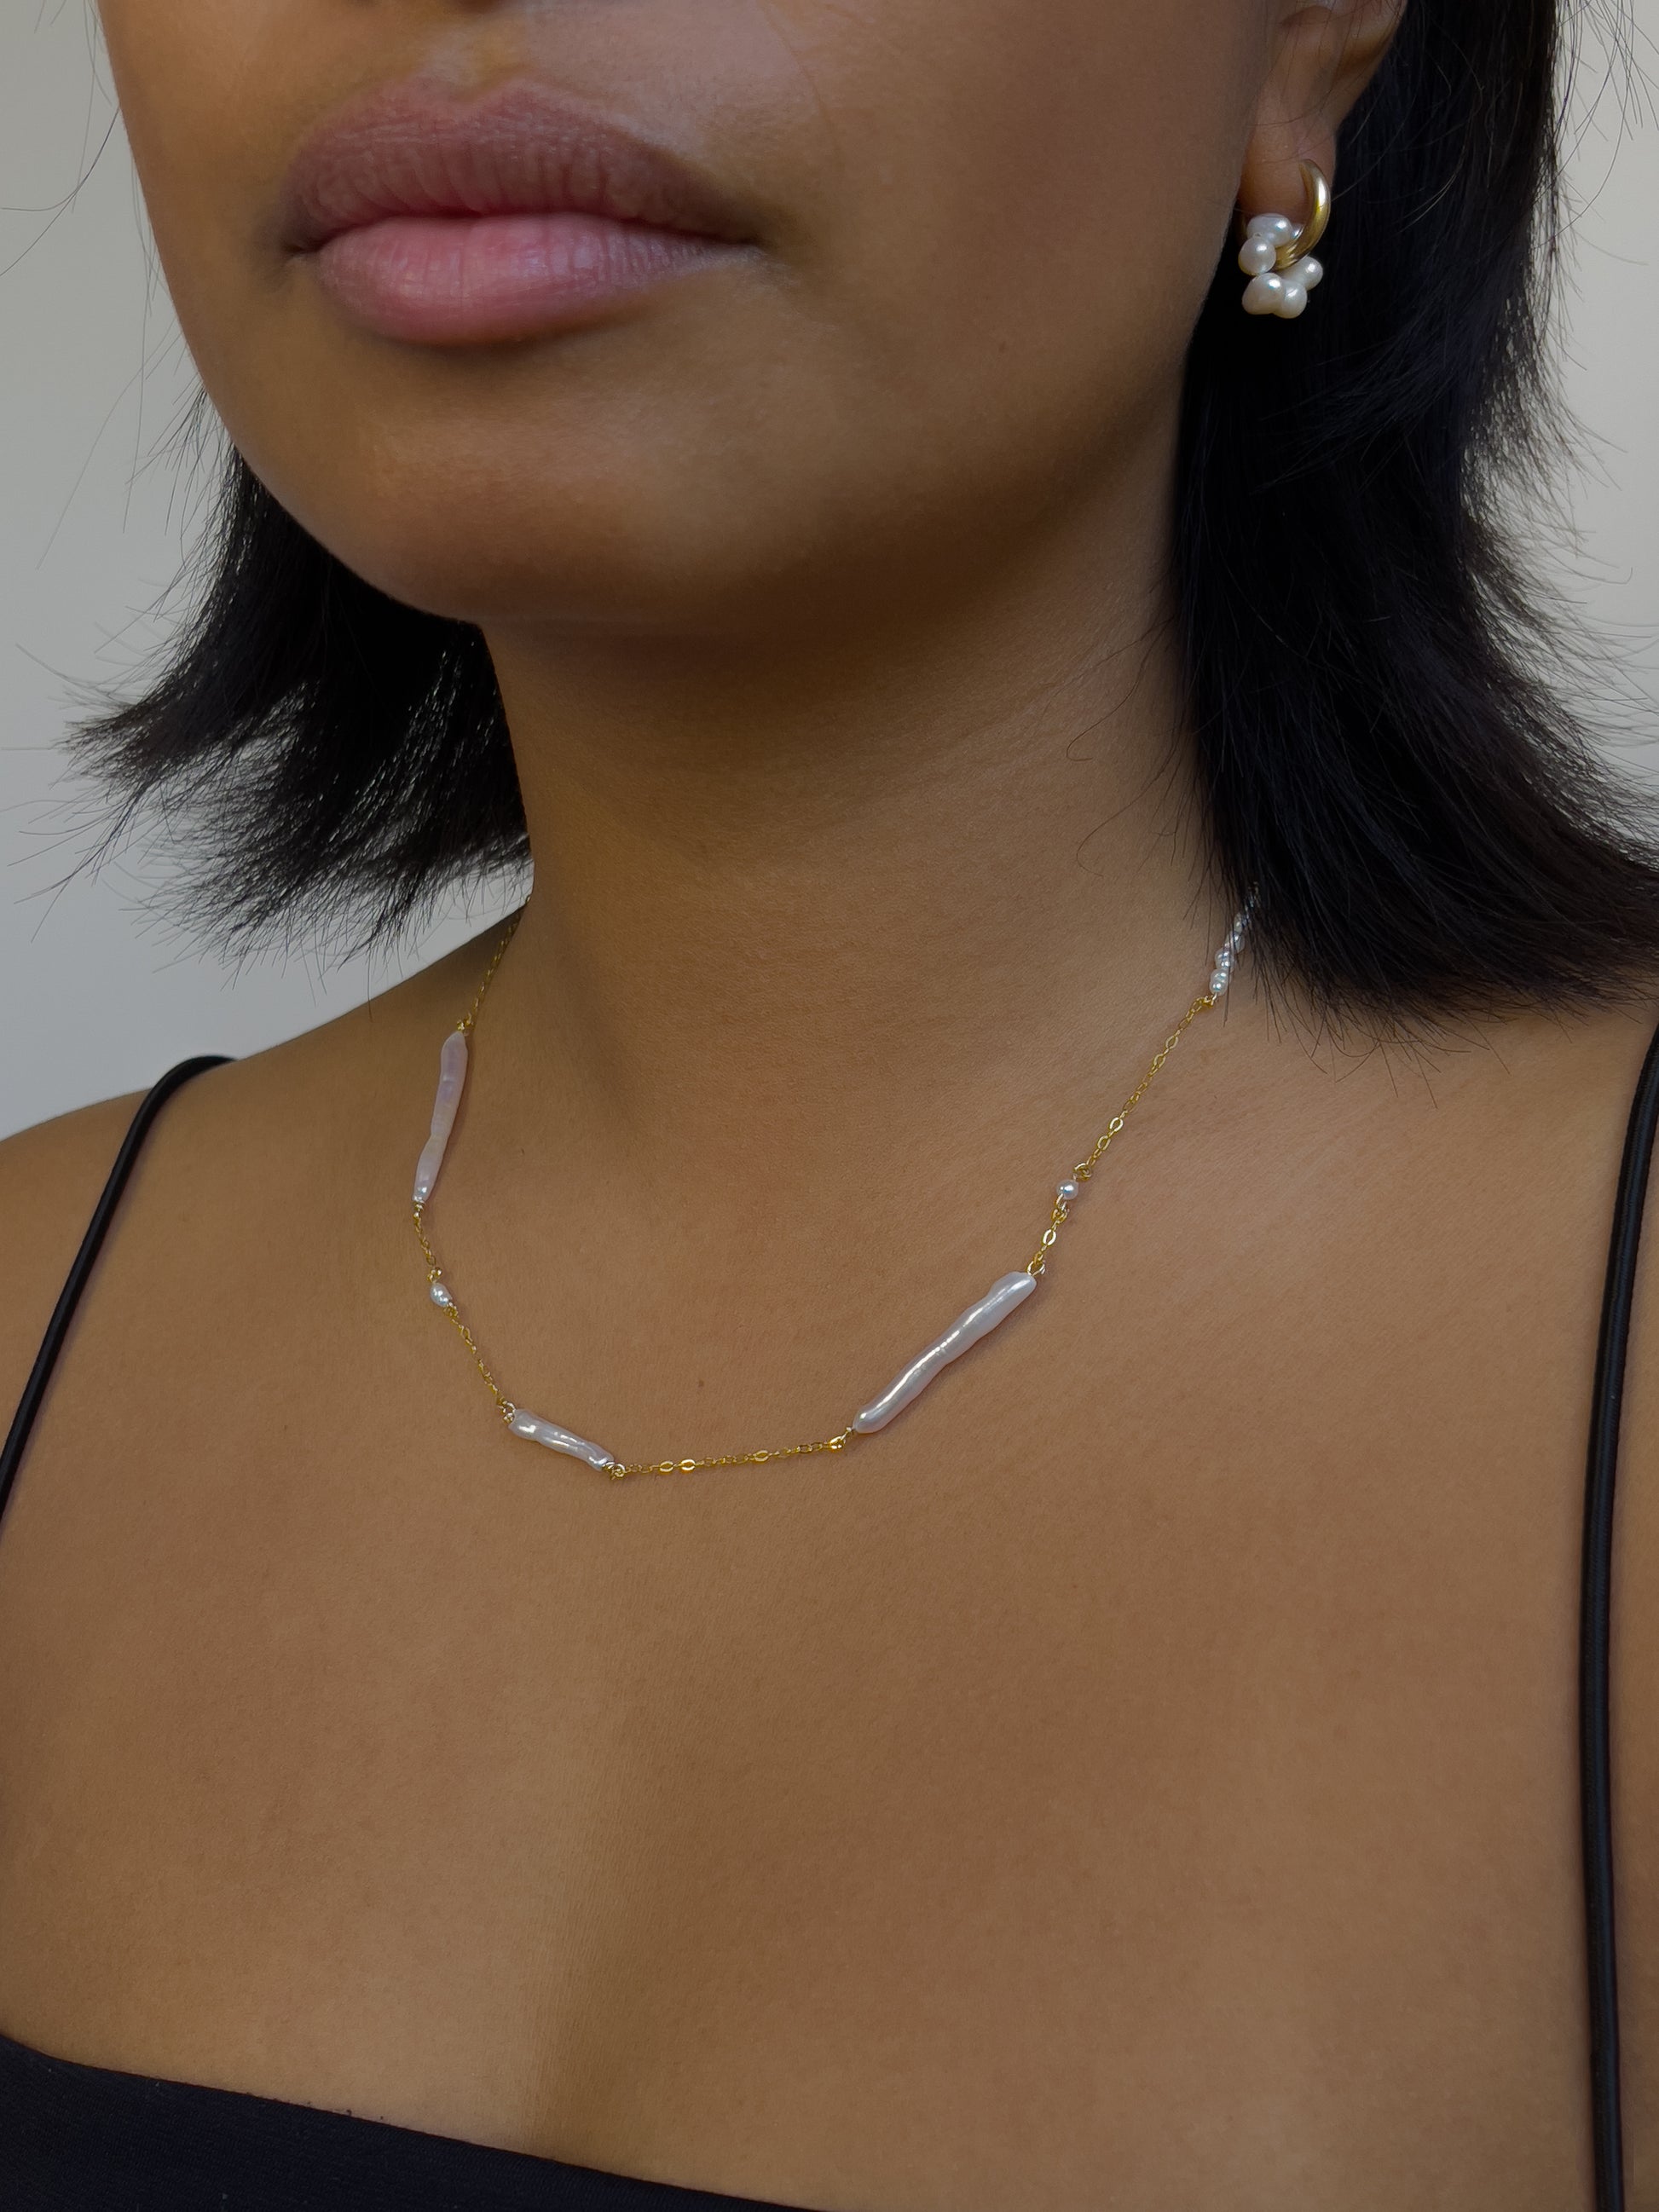 Biwa pearl gold necklace. This ultra fine 14 karat Gold filled with sterling silver flat cable chain suspends gorgeous Biwa elongated freshwater pearls and freshwater seed pearls. Designed and made by nāmaka.